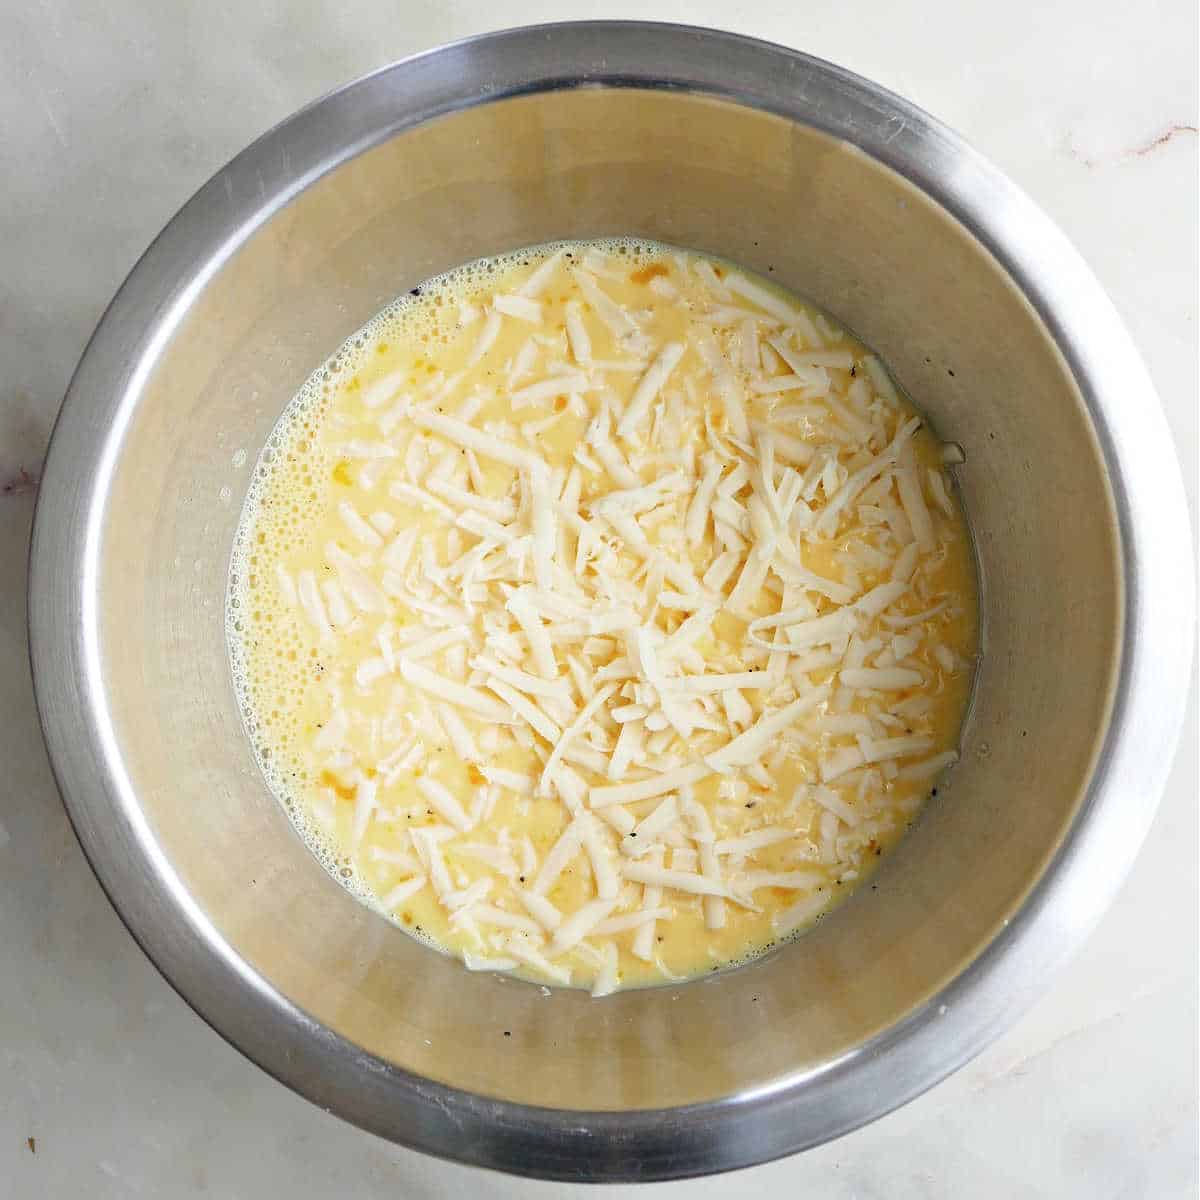 eggs whisked together with milk, cheese, and seasonings in a bowl